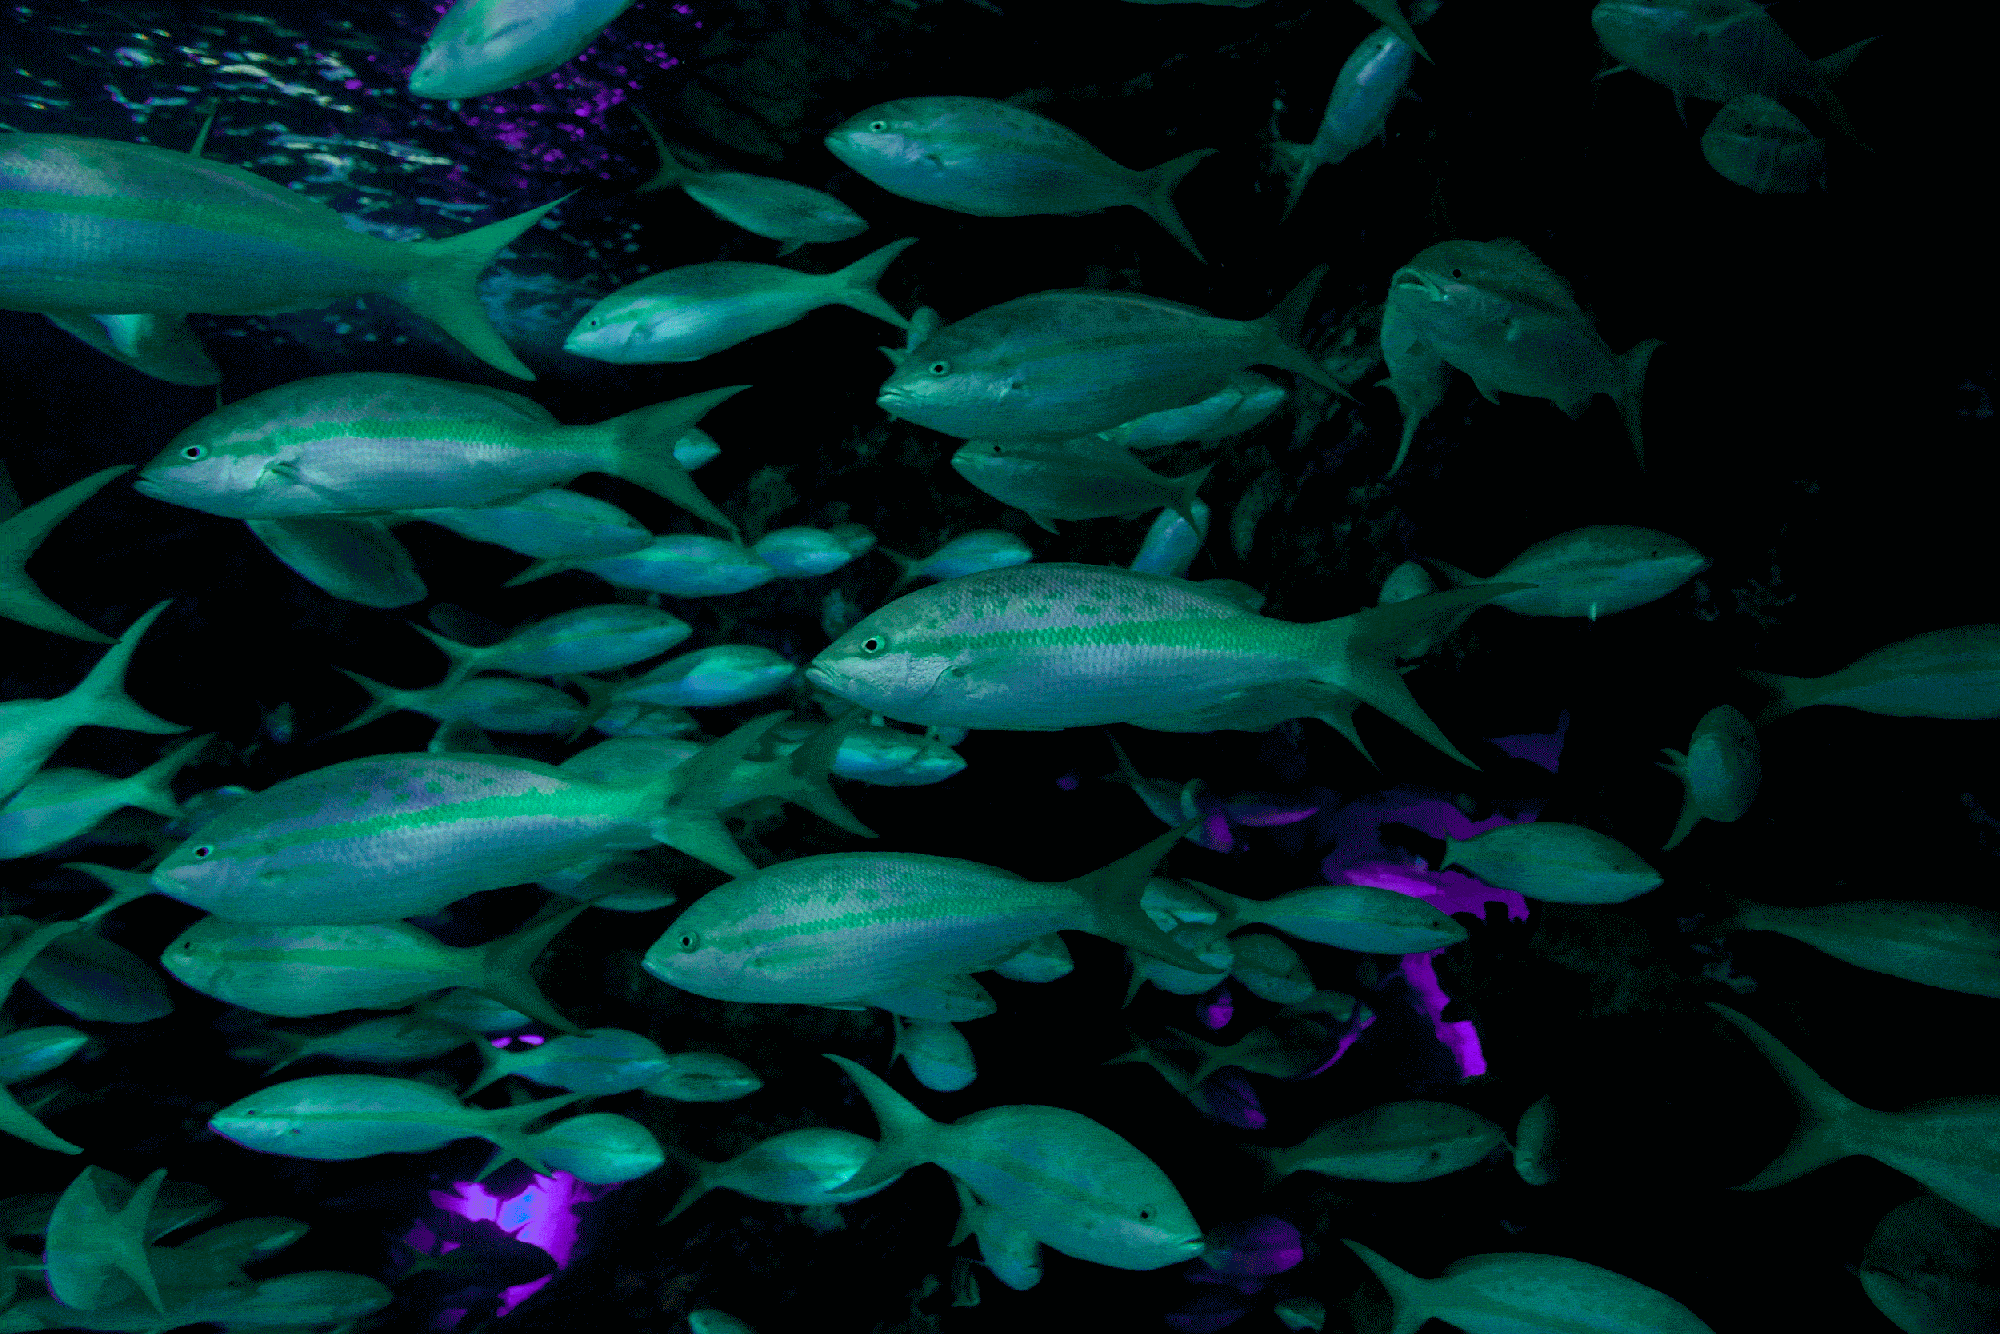 A tank of fish from the Toronto Aquarium in Toronto, Ontario, Canada, photographed by Todd Spoth.